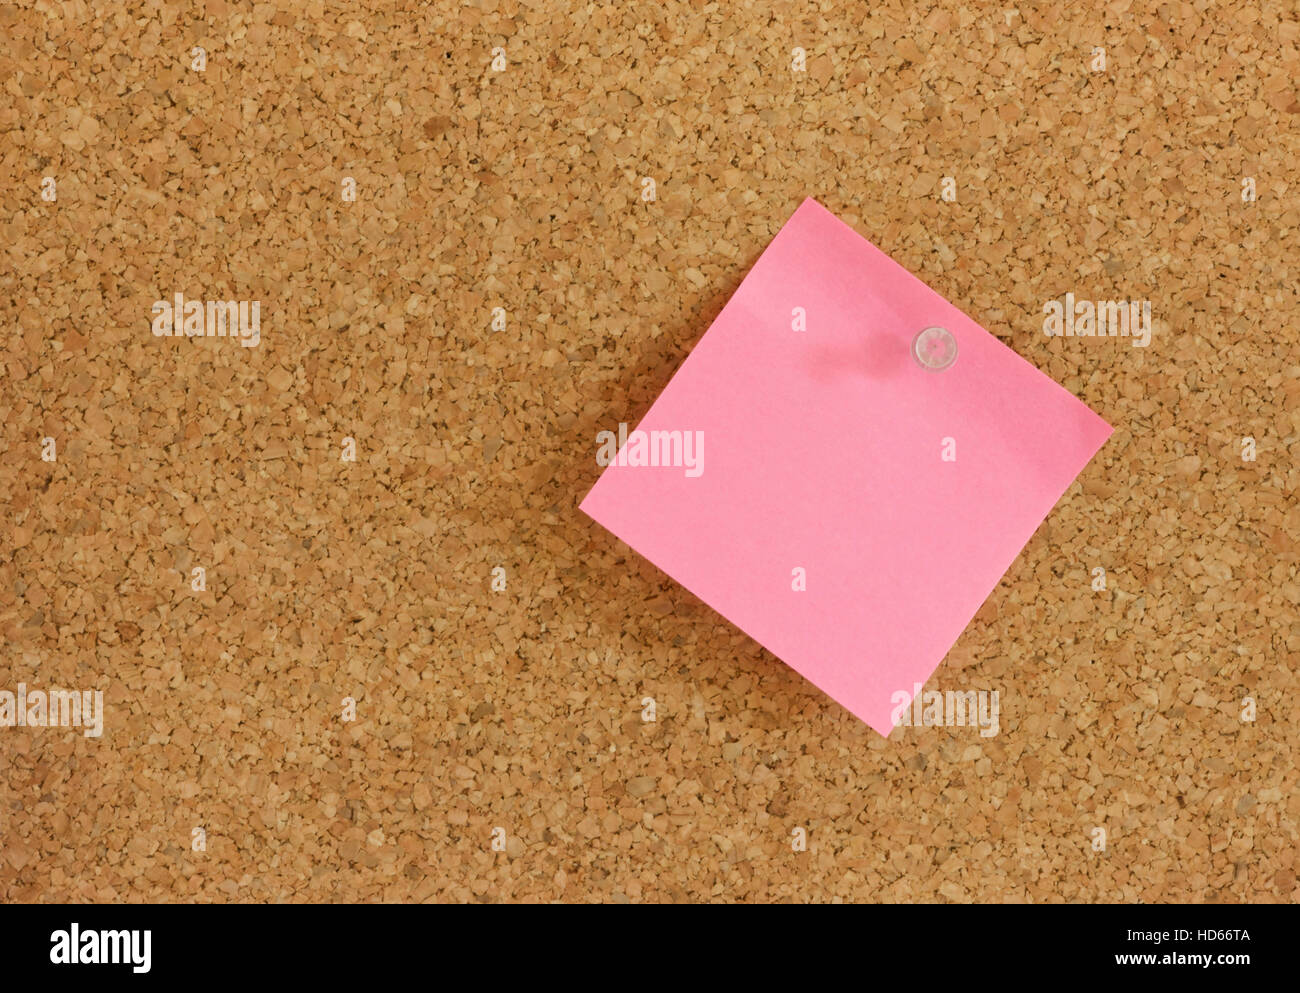 Pink post-it note memo pinned to a pin board Stock Photo